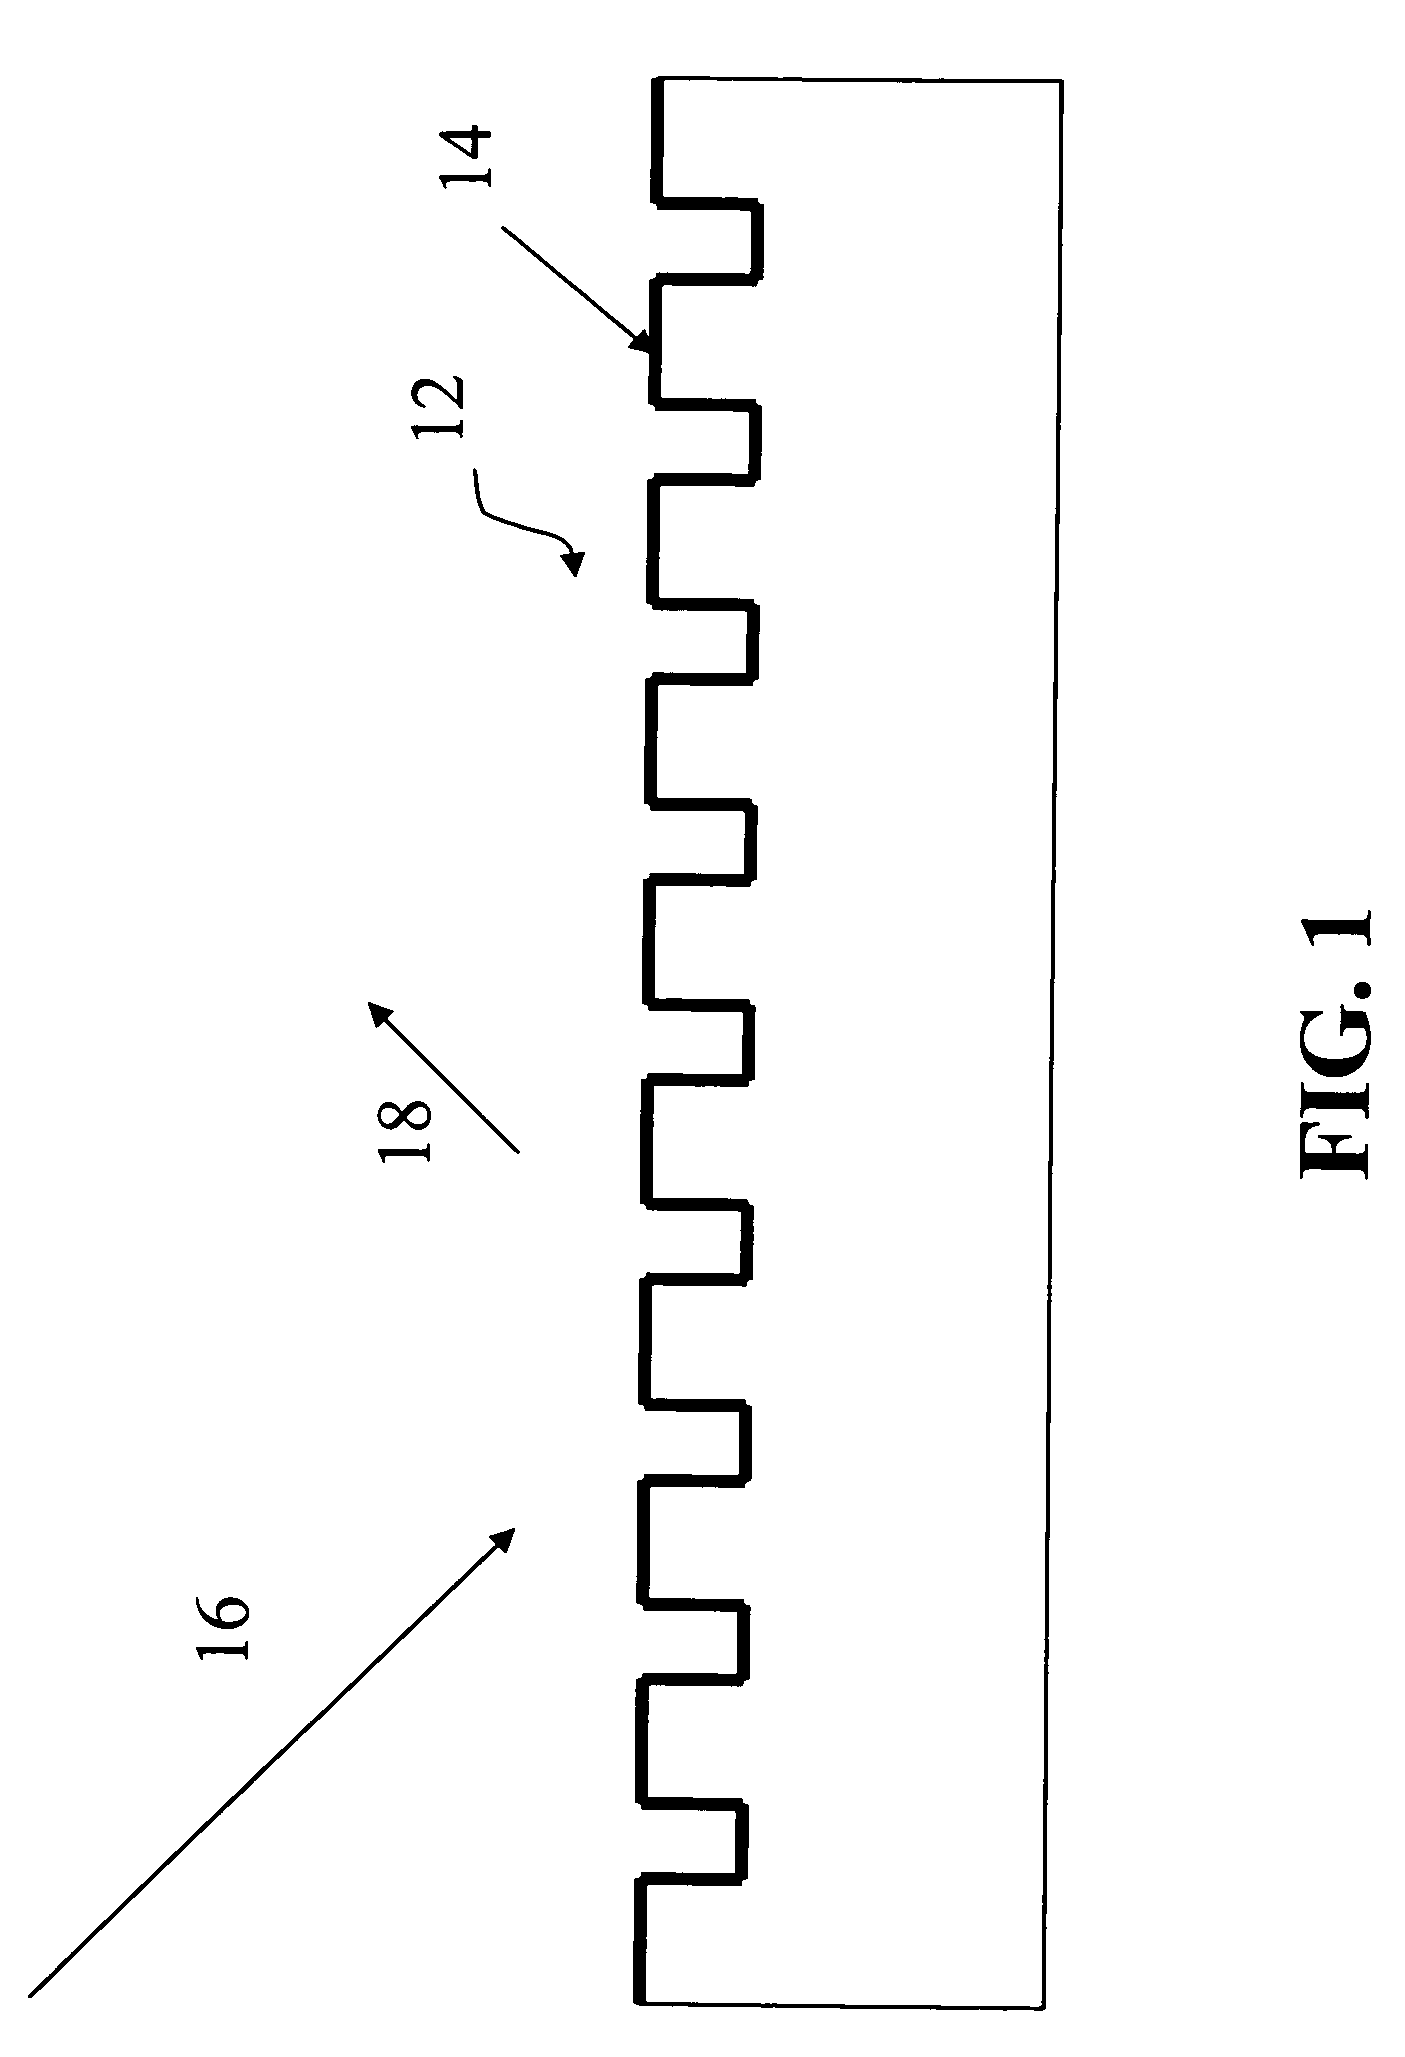 Nonlinear optical guided mode resonance filter